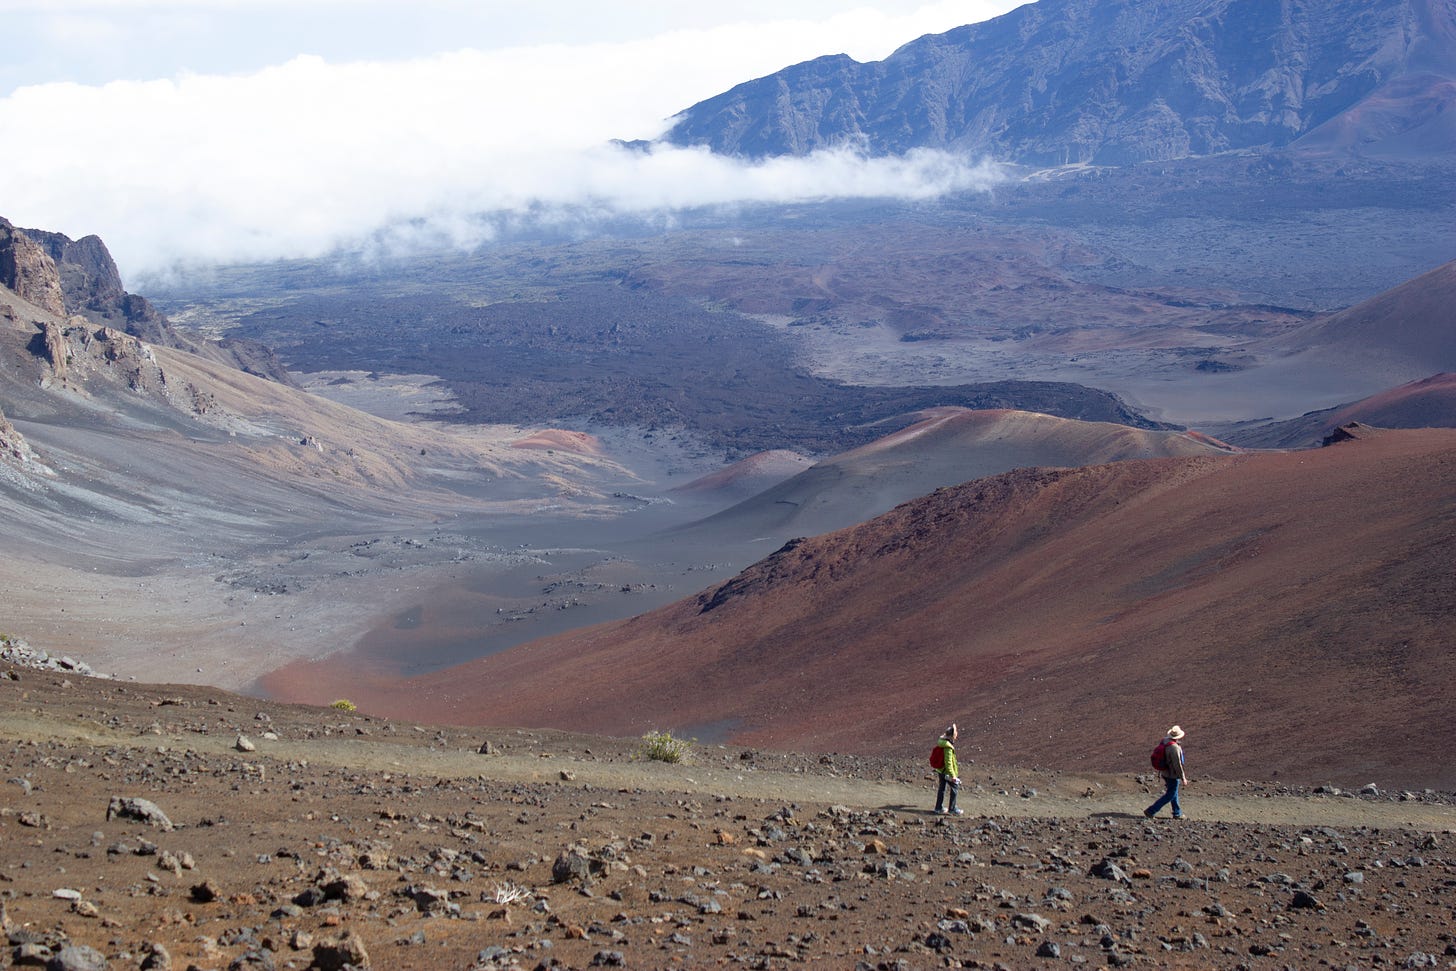 Two figures, one wearing a bright green jacket and a floppy hat and one wearing a broad-brimmed white hat and light brown shirt look over the vast, reddish brown soil of a volcano from a hiking trail. They're dwarfed by the caldera. The dark brown rock of a former lava flow runs through the center of the image toward green fields and thick whiteish gray crowds flowing just into the caldera.